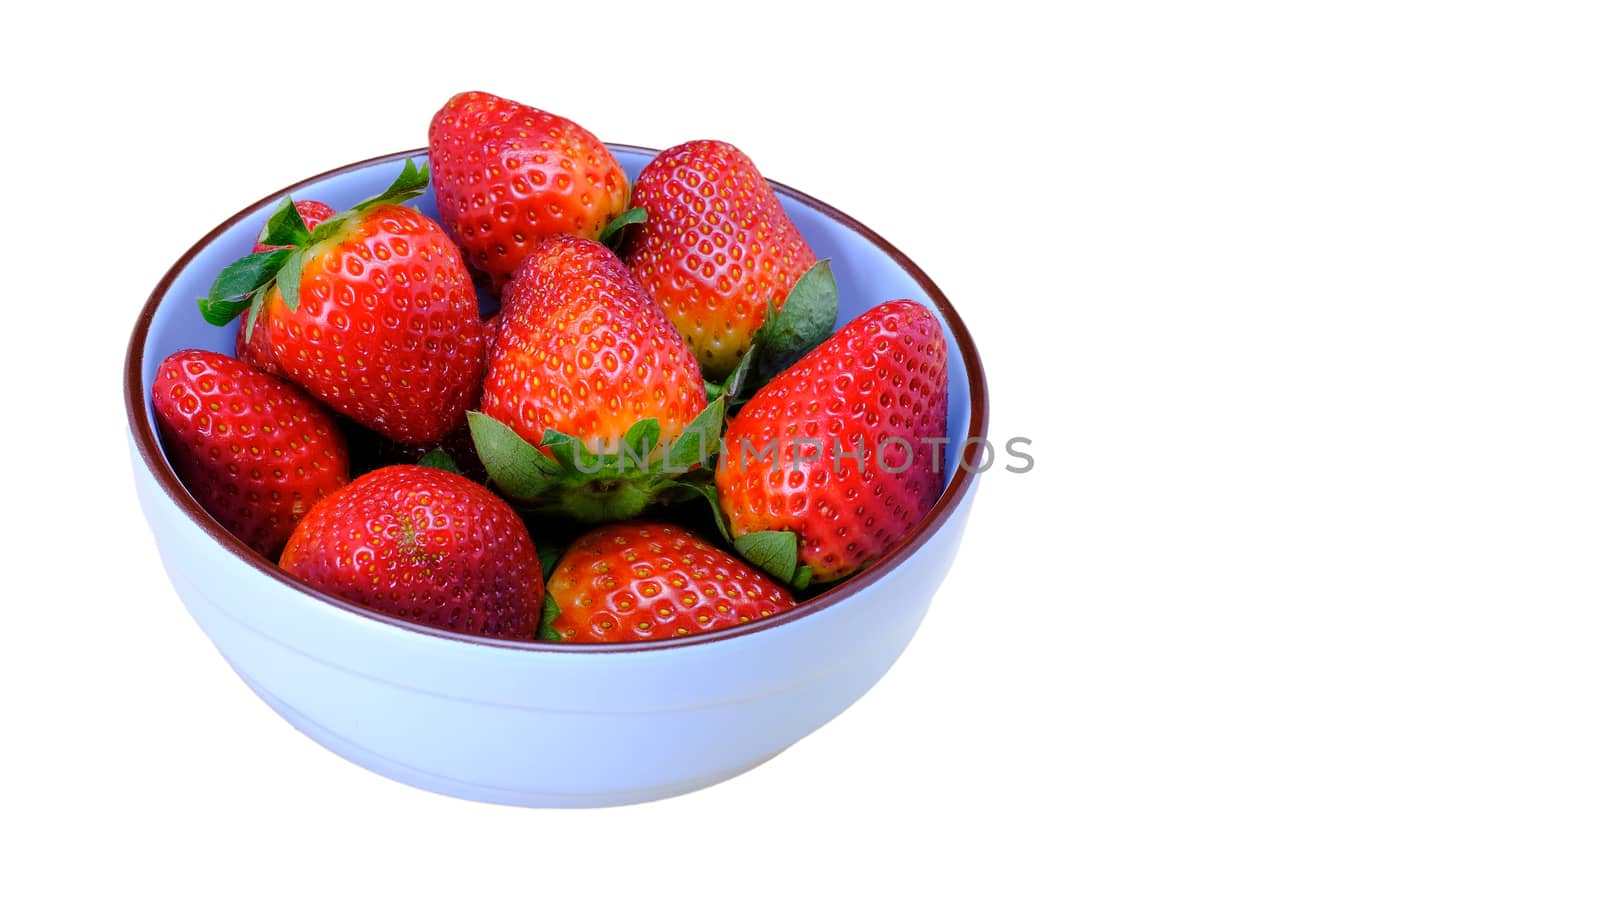 a bunch of large strawberries on a blue ceramic bowl, isolated on white background, copy space